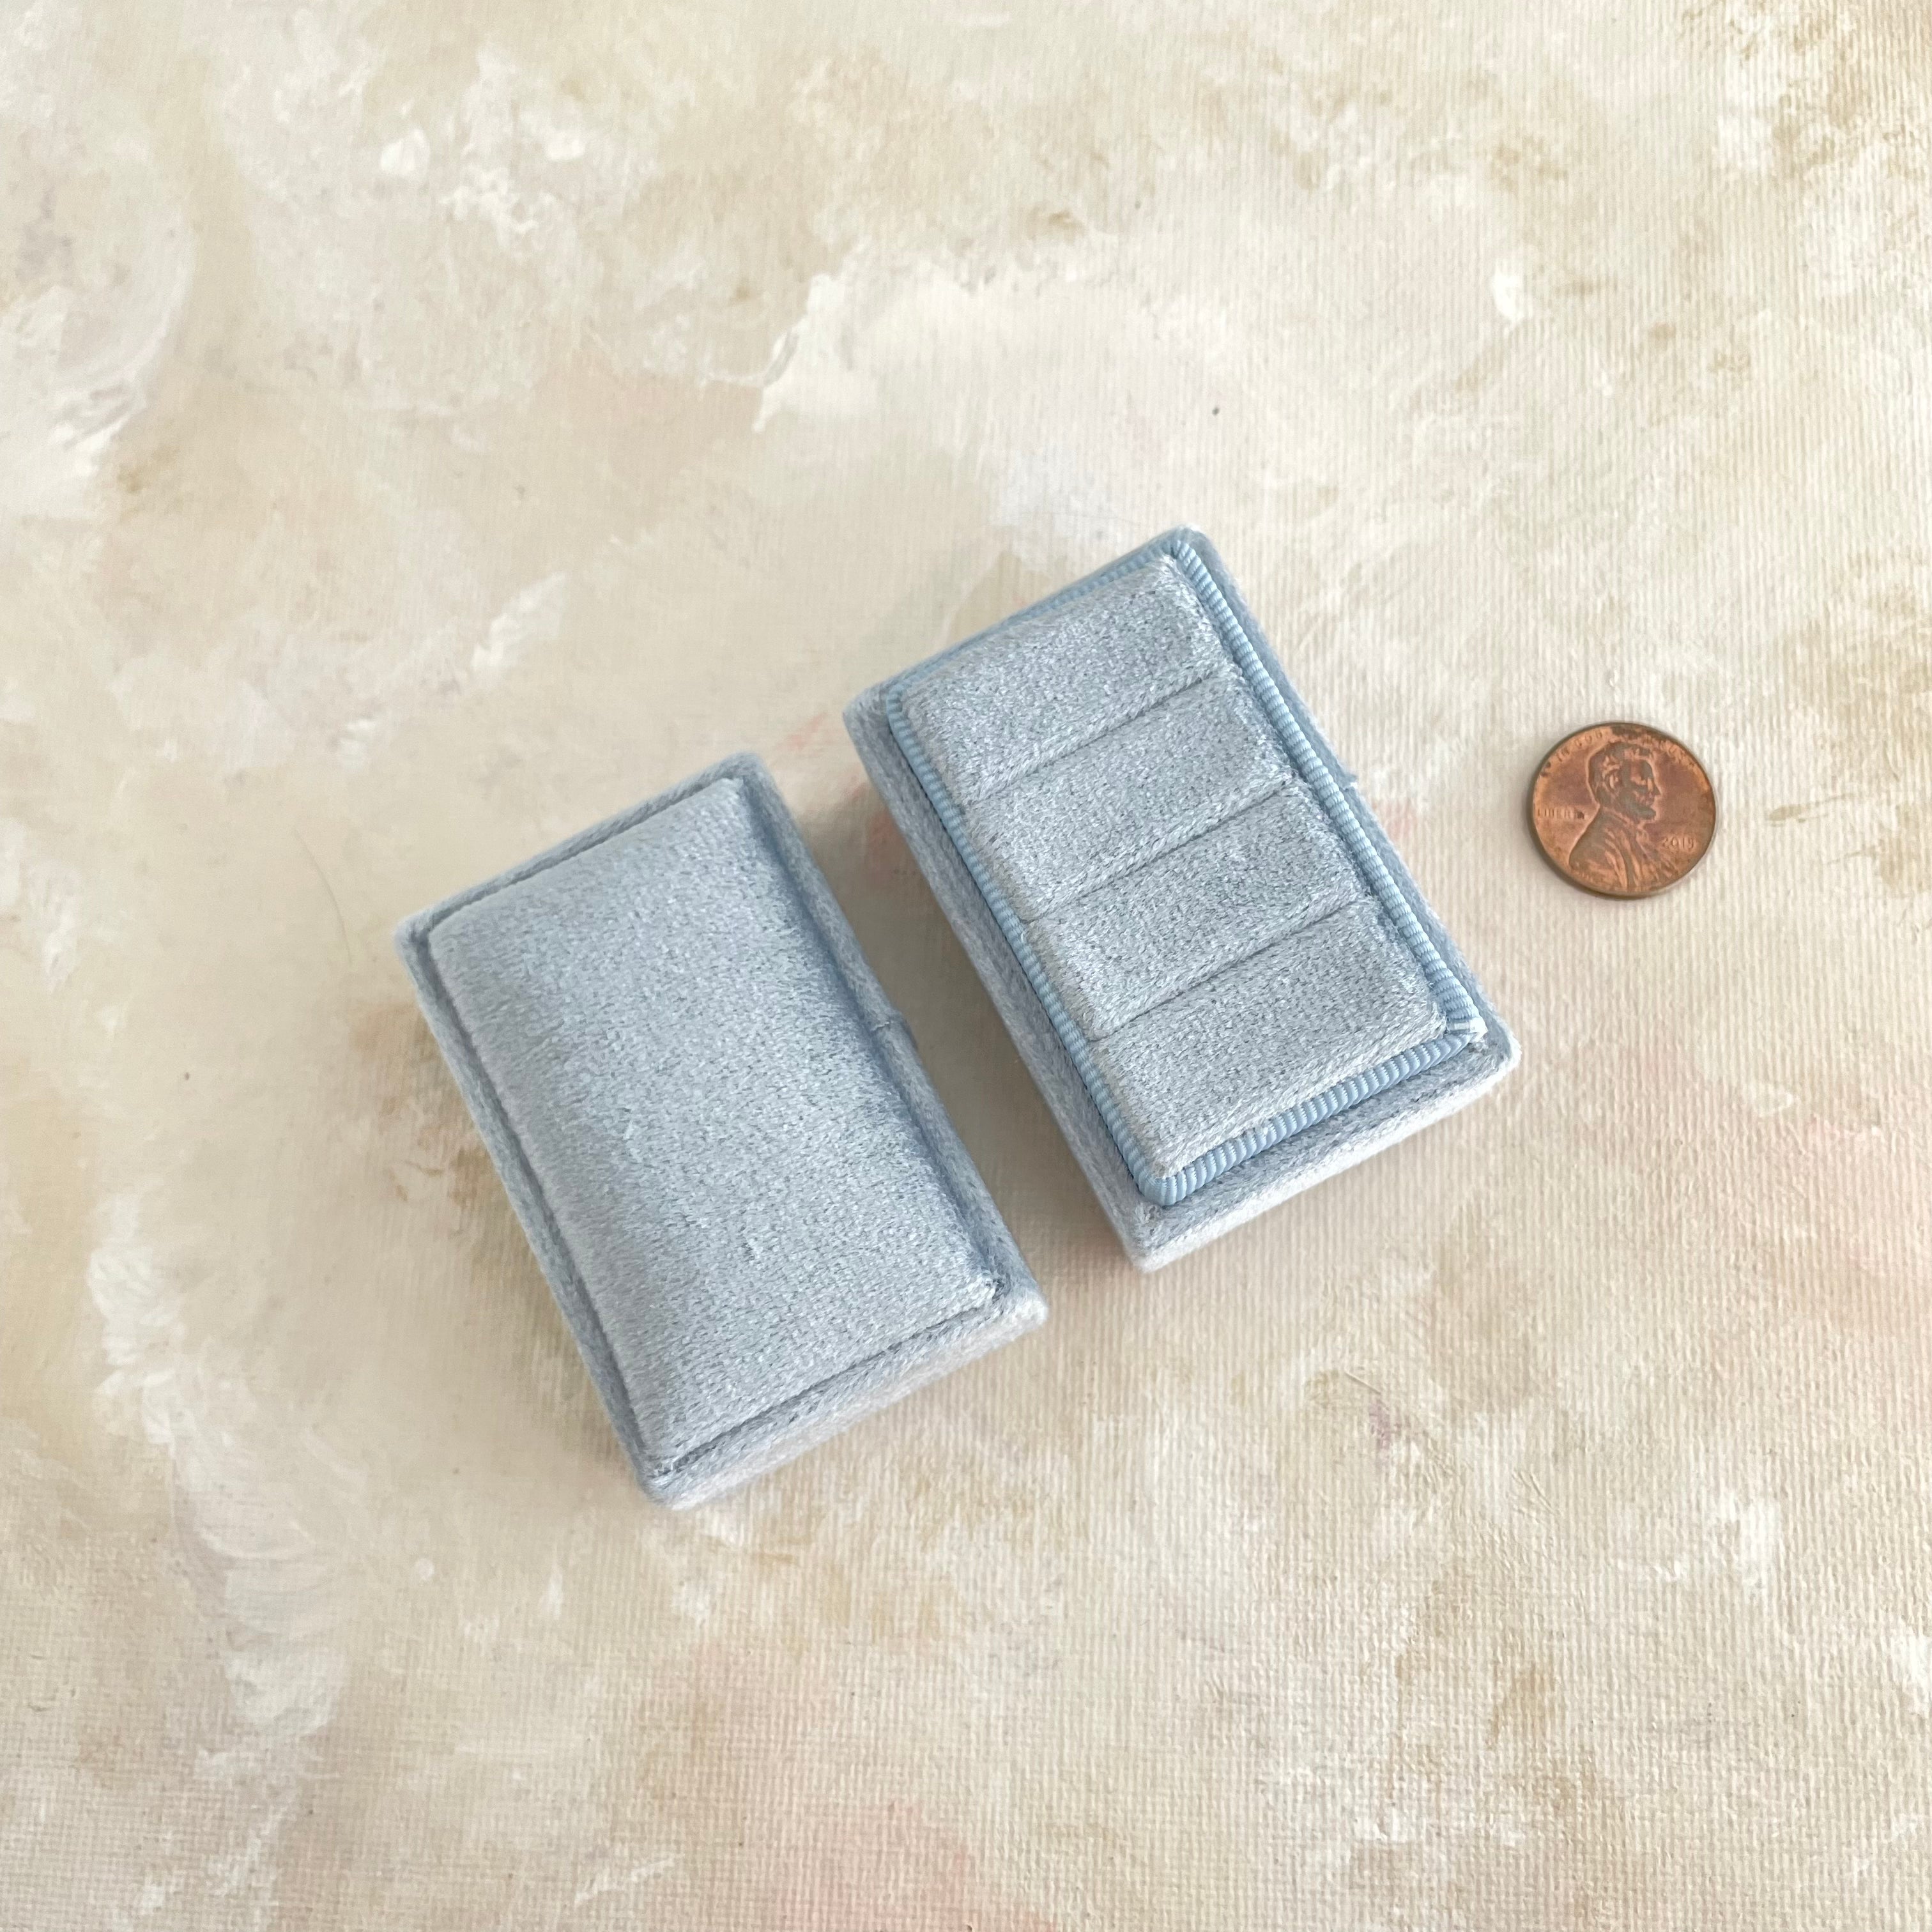 Dusty Blue 3 slot ring box with penny beside for size reference   - Wedding Flat lay props from Champagne & GRIT